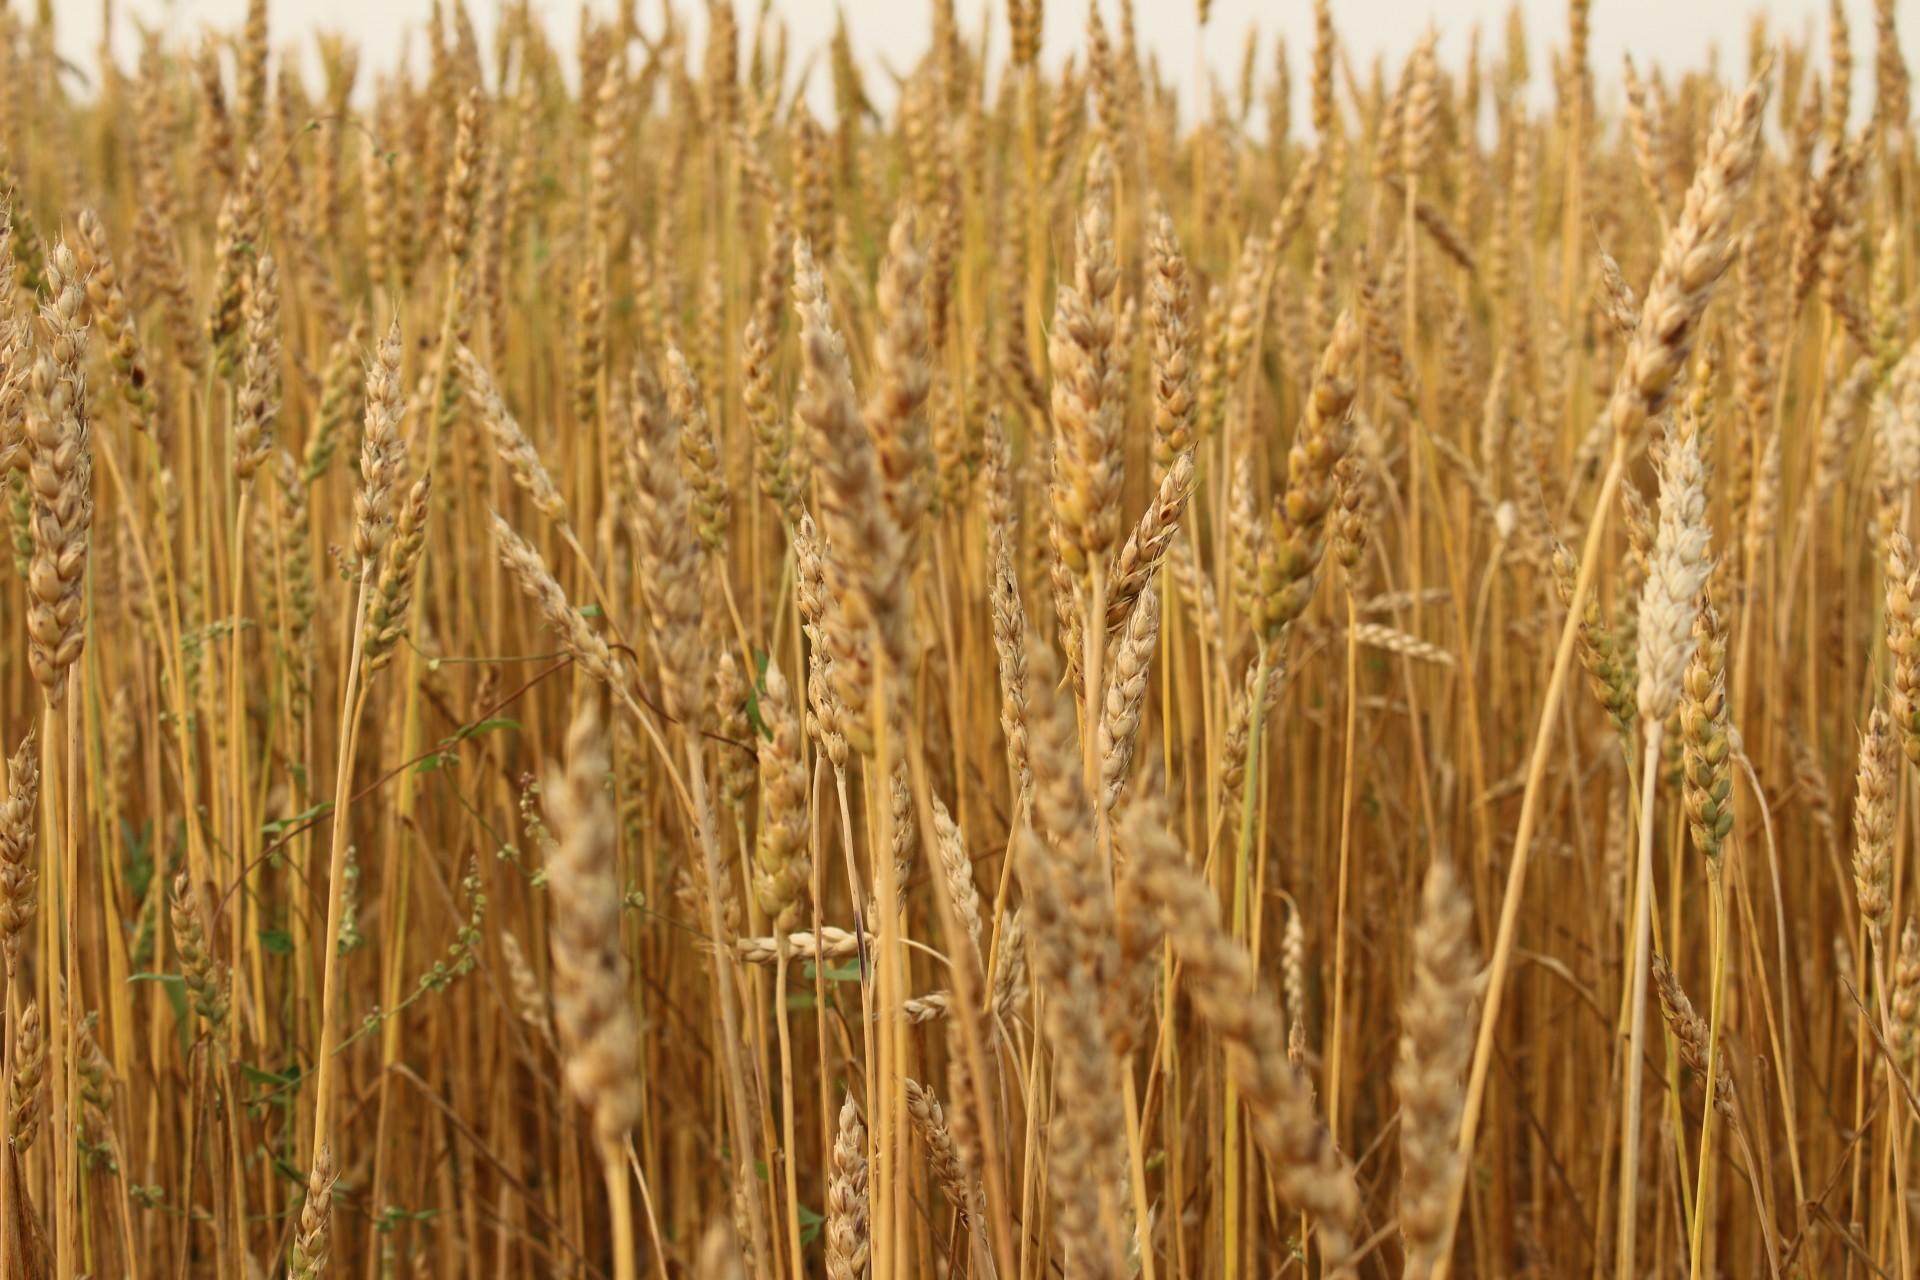 A wheat farm used to illustrate the story